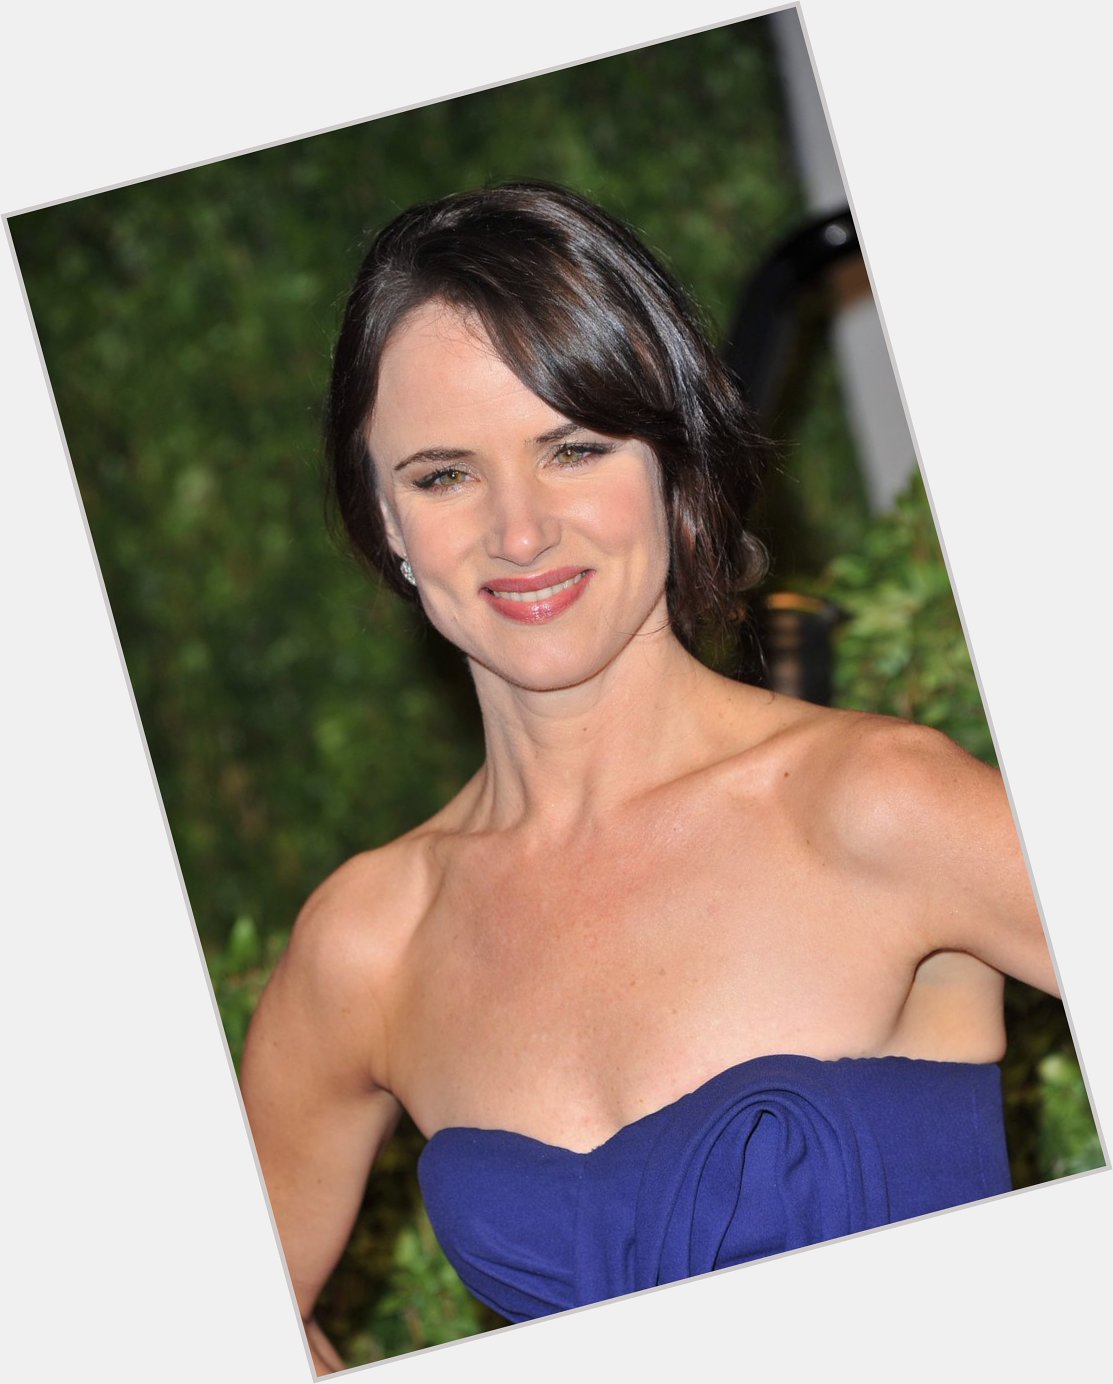 Happy Birthday to Juliette Lewis! 

What is the first role you think of when you see her picture? 